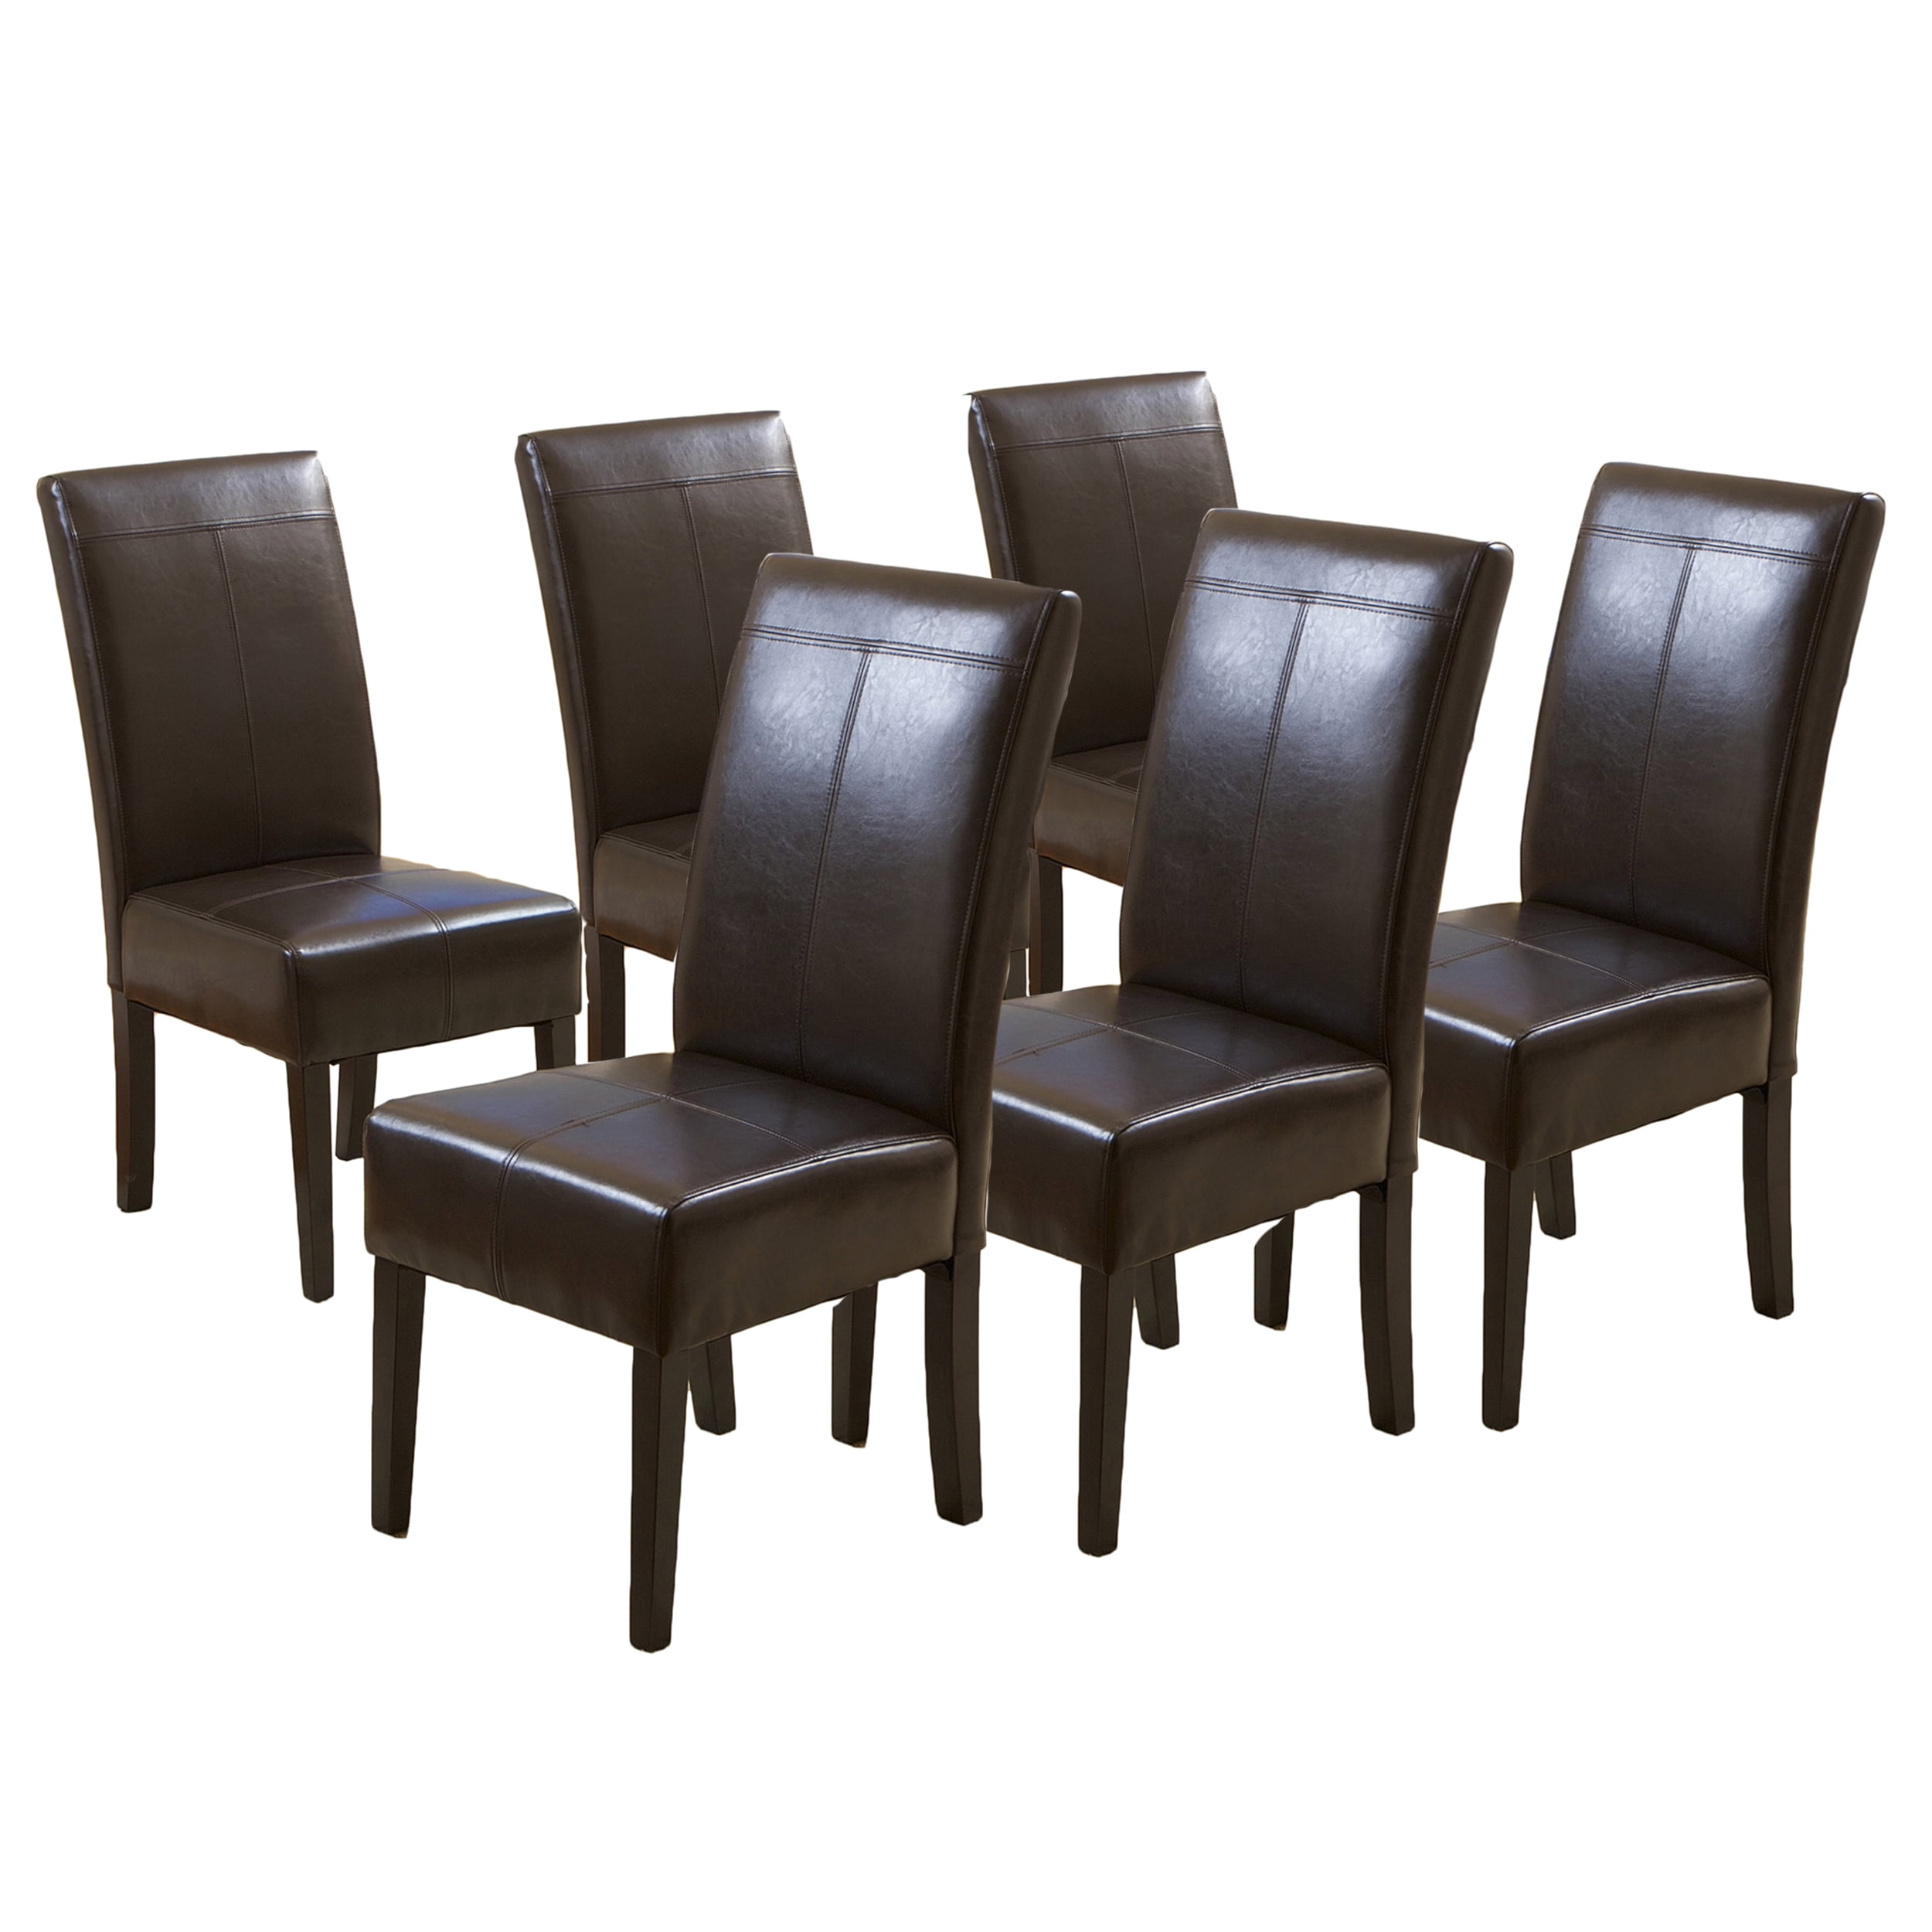 Emerson Tstitch Leather Dining Chairs, Chocolate Brown